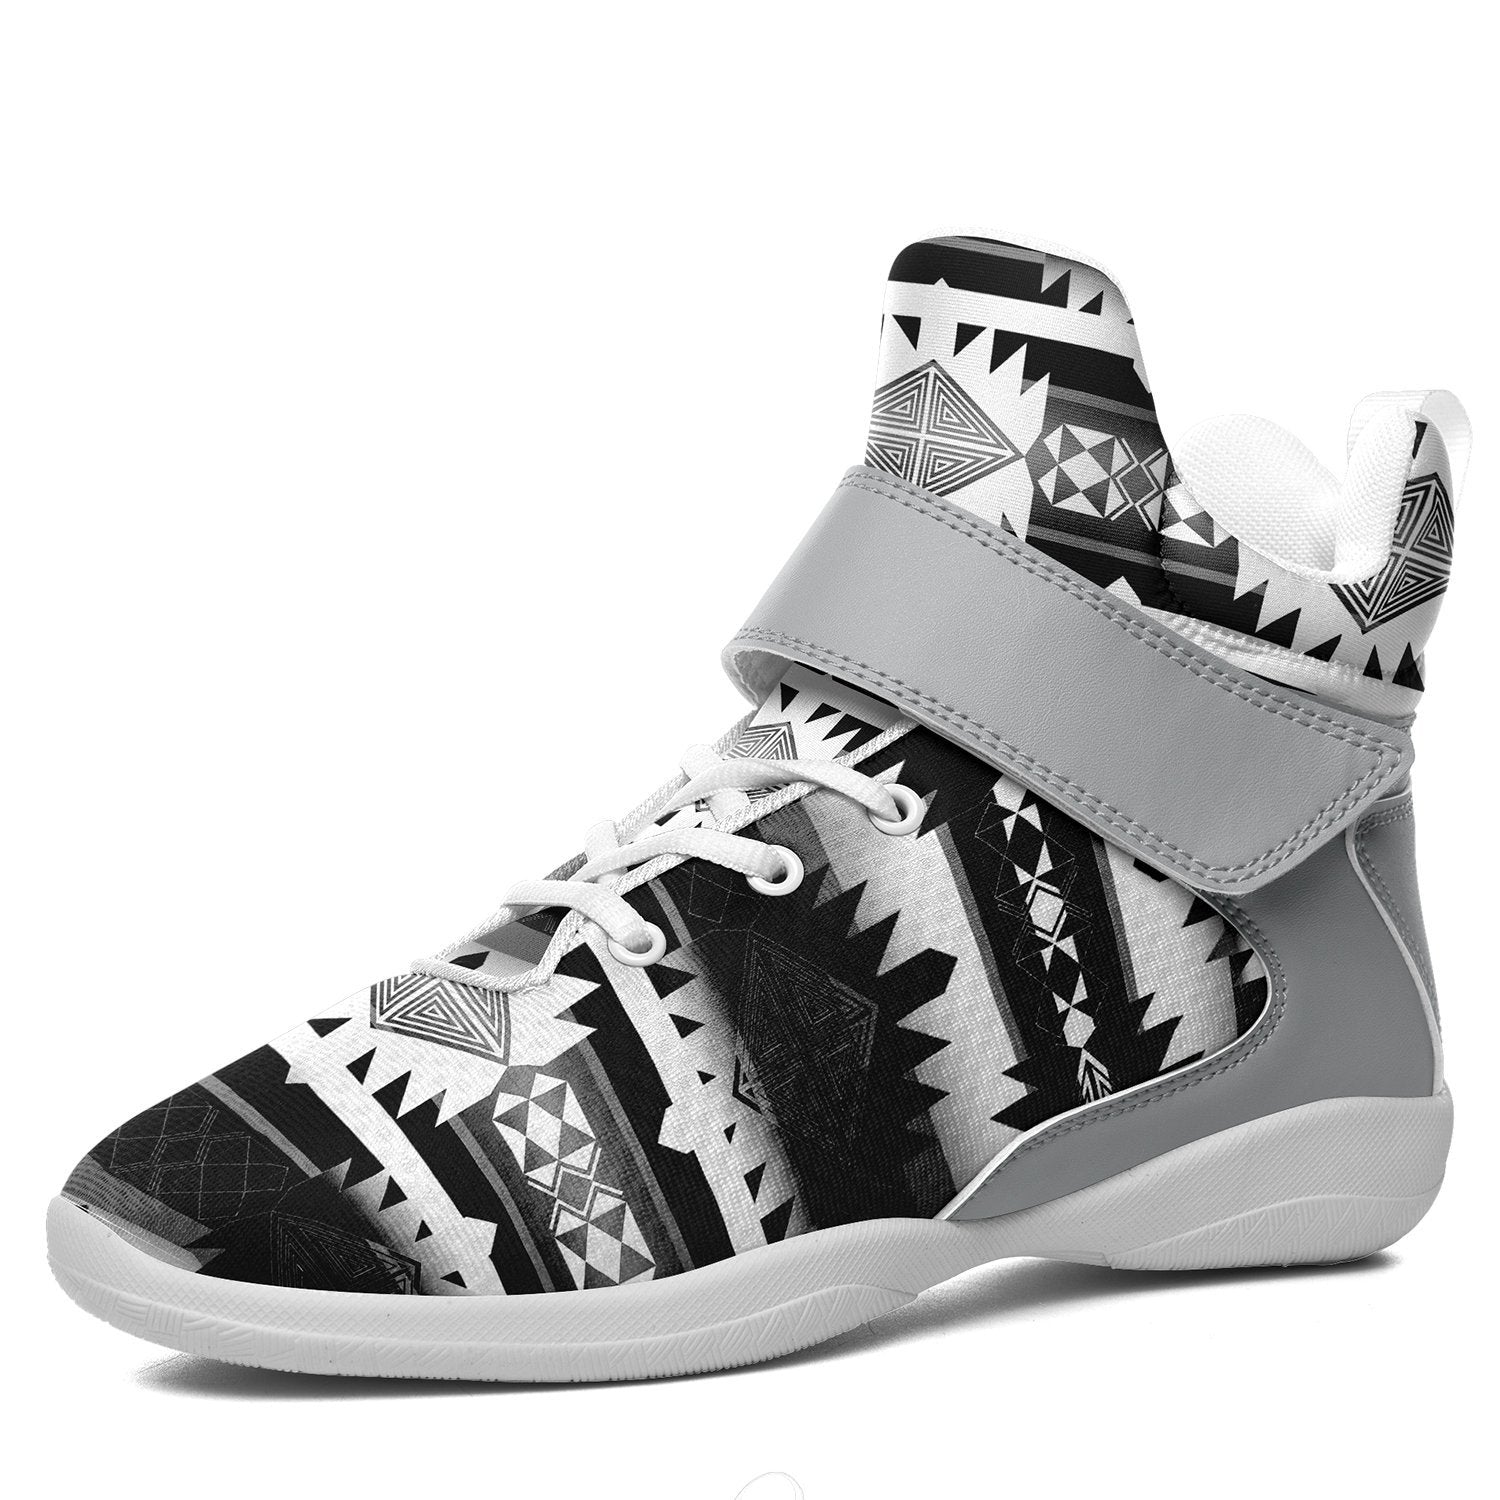 Okotoks Black and White Ipottaa Basketball / Sport High Top Shoes - White Sole 49 Dzine US Men 7 / EUR 40 White Sole with Gray Strap 